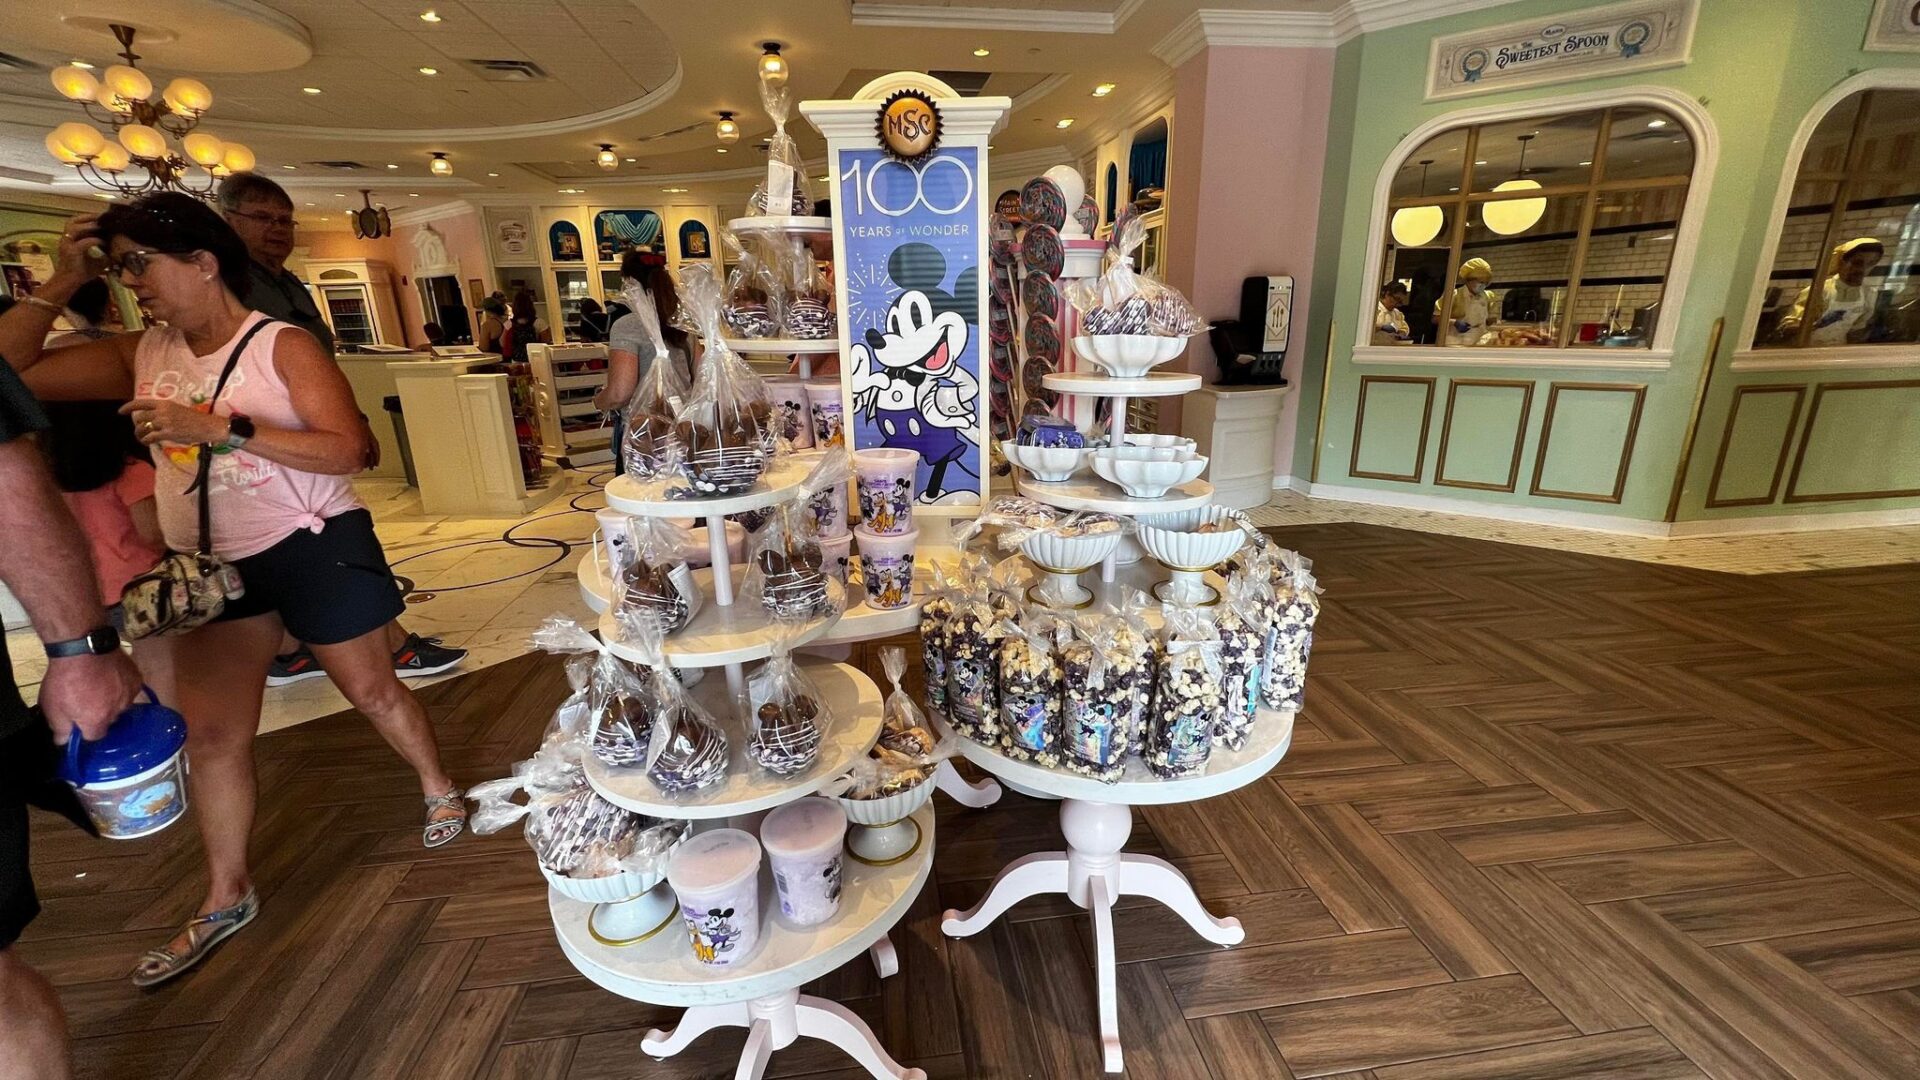 New Disney100 Decorations & Treats Installed in Main Street Confectionery at the Magic Kingdom